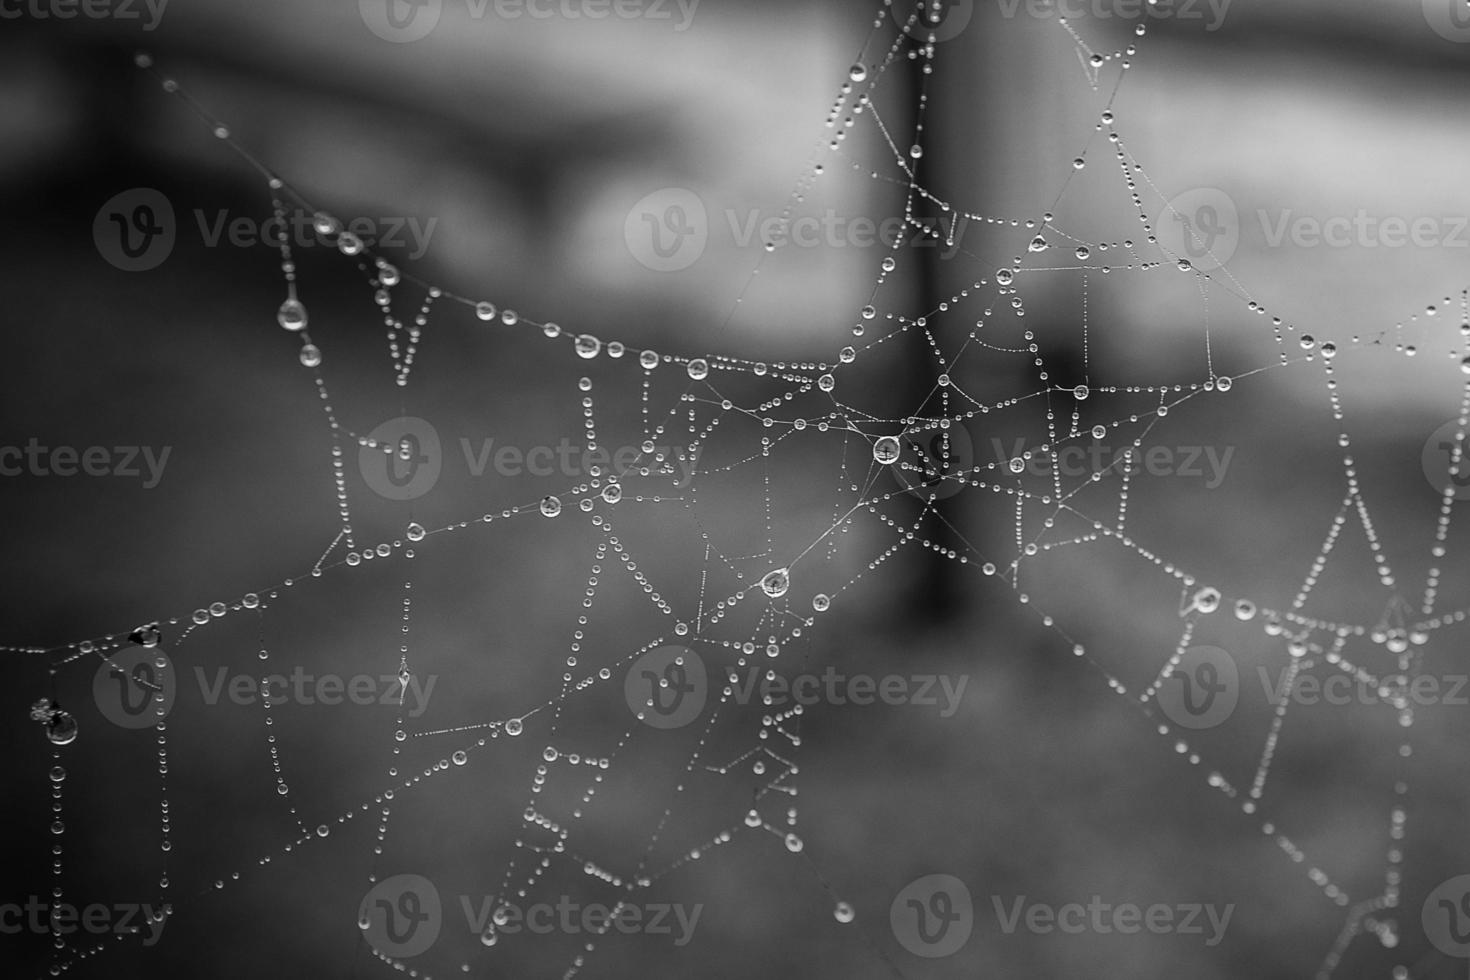 little soft water drops on a spider web on an autumn day close-up outdoors photo